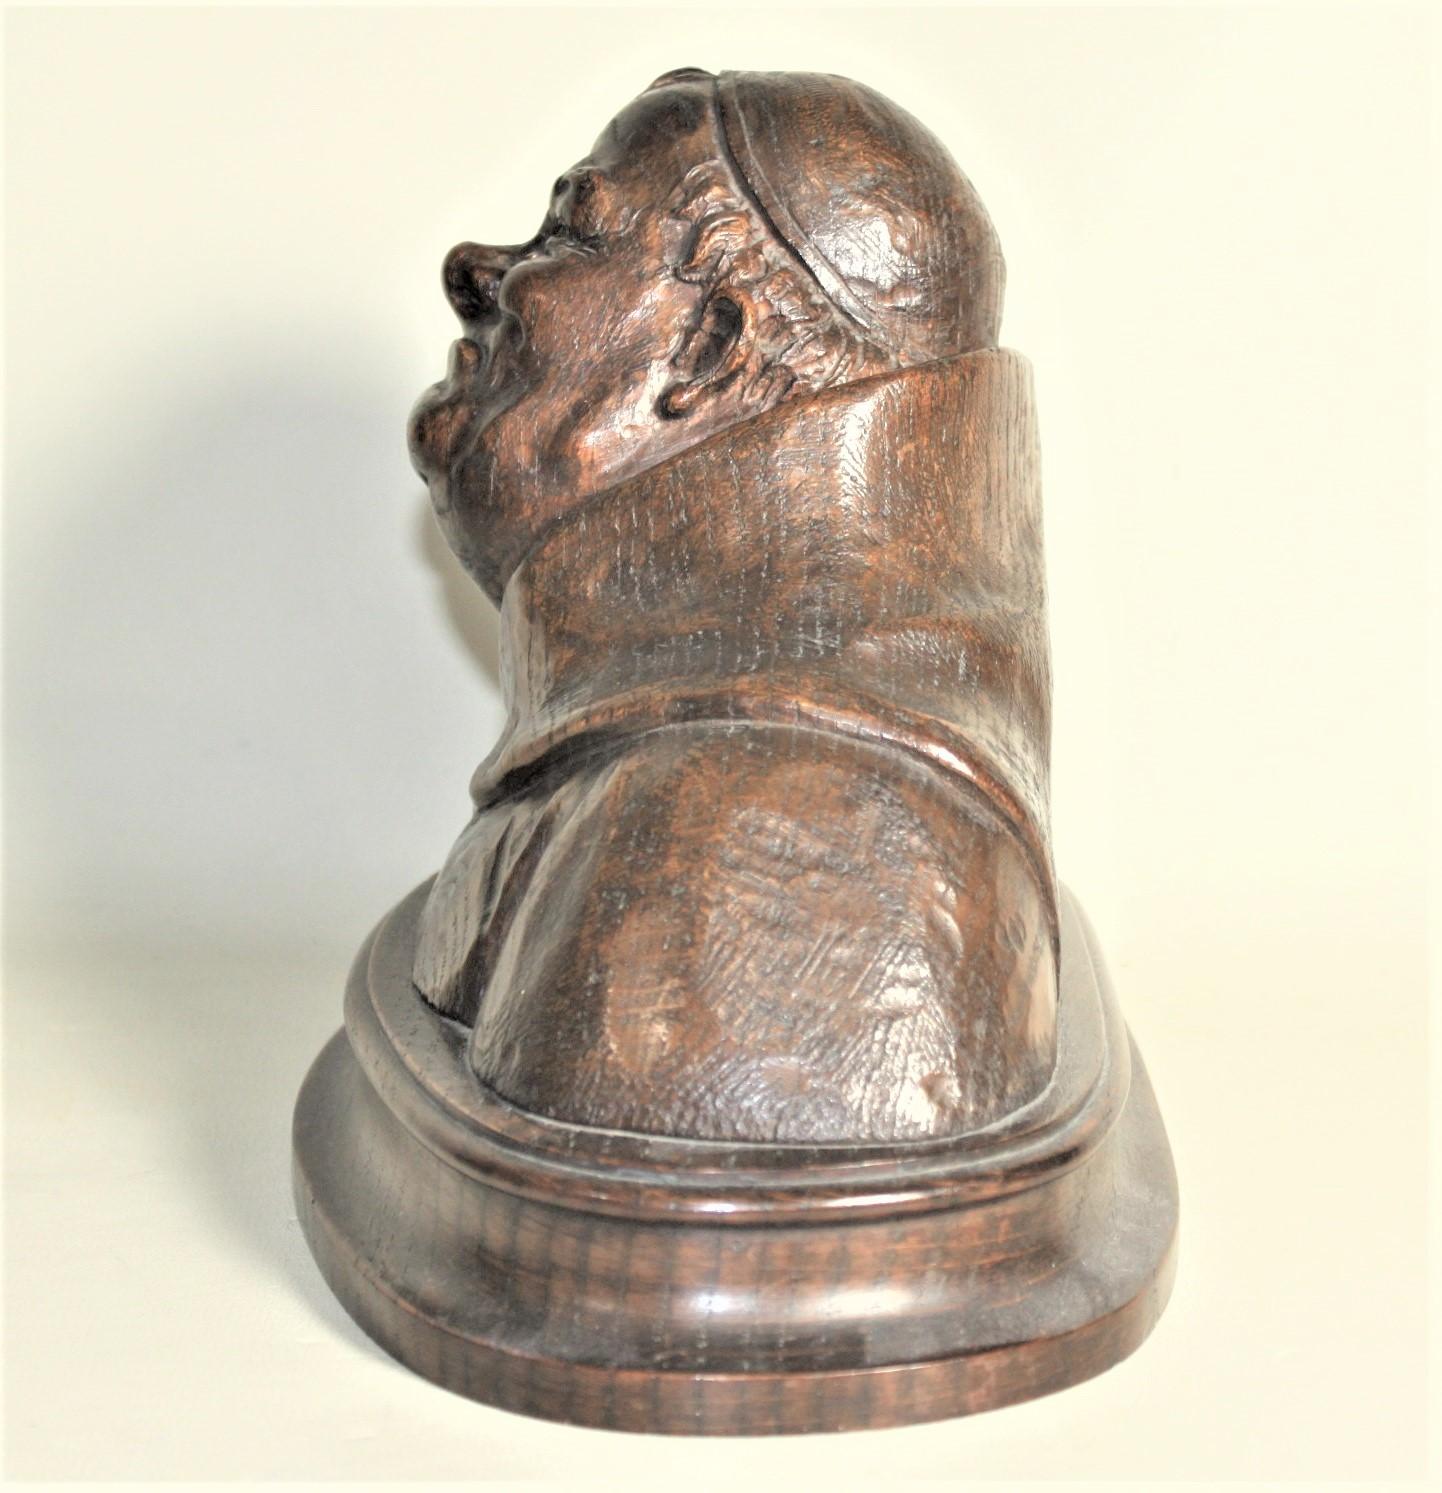 Hand-Carved Antique Hand Carved Oak Wood Bust or Sculpture of a Religious Monk or Friar For Sale